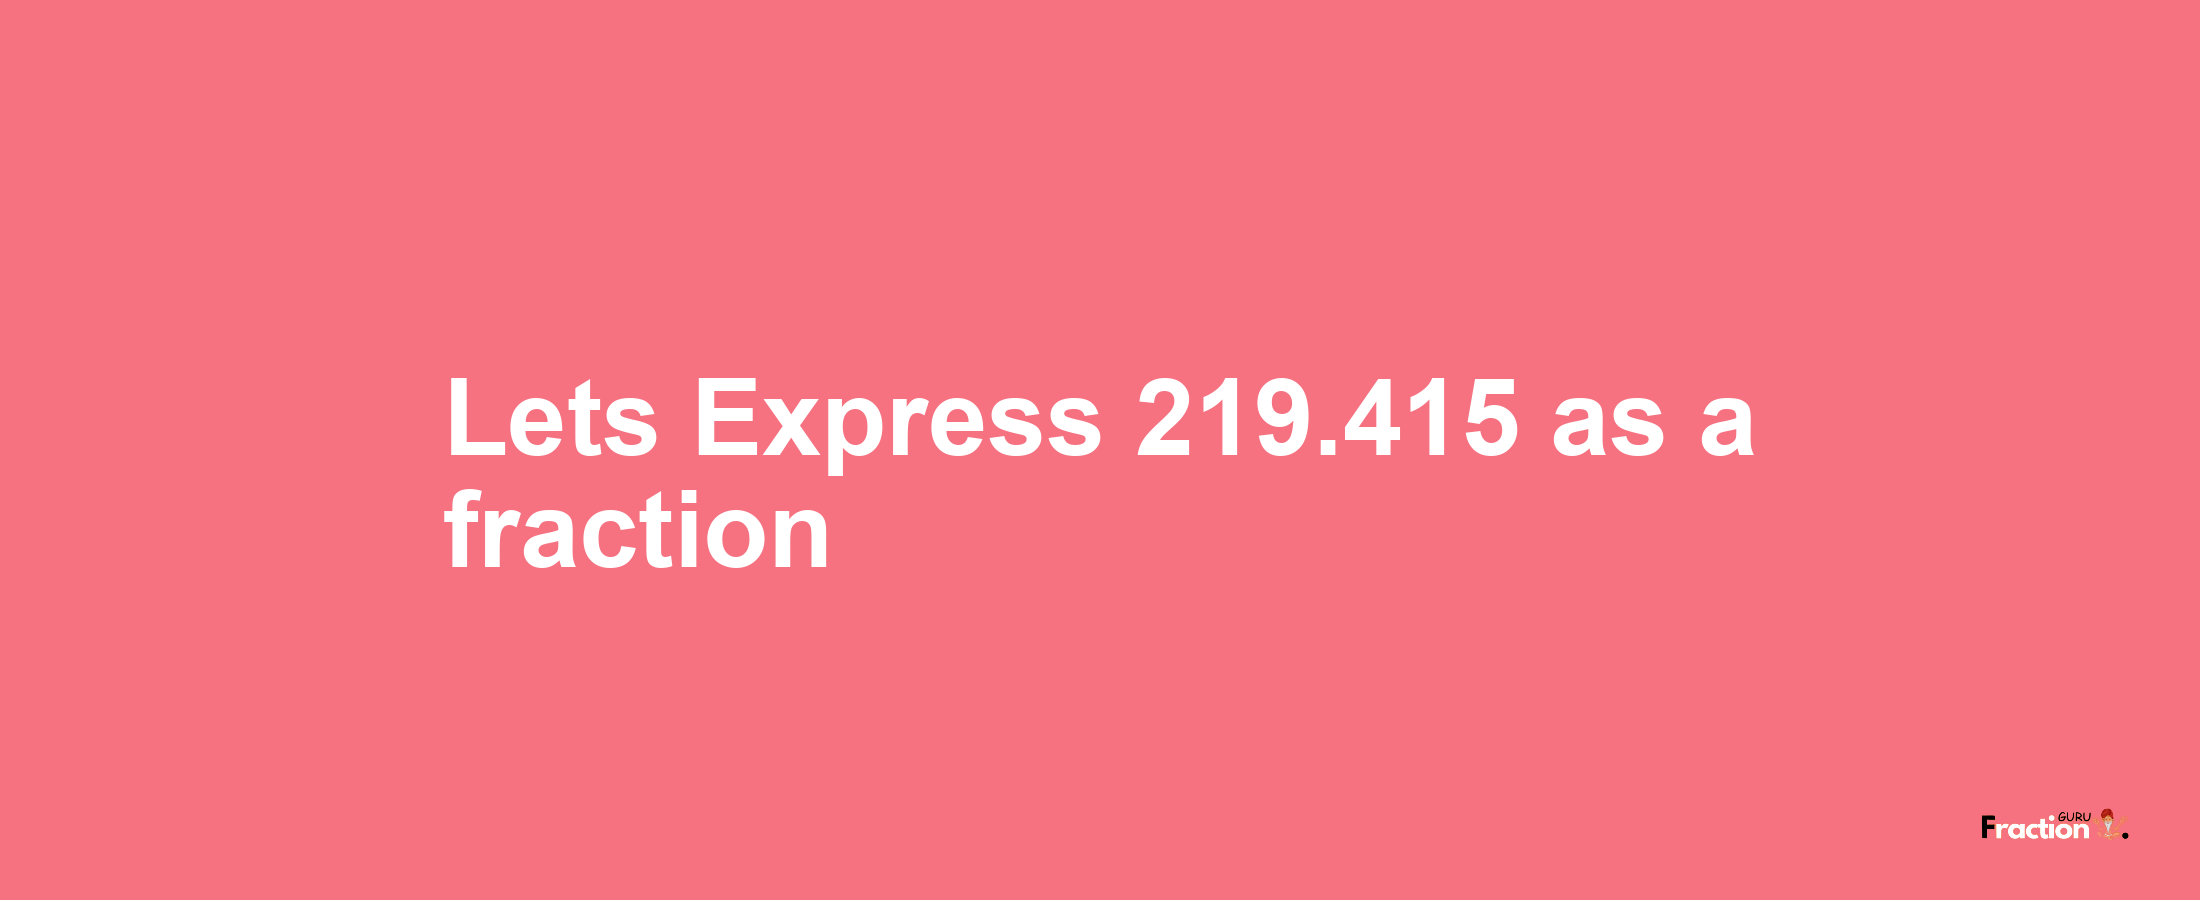 Lets Express 219.415 as afraction